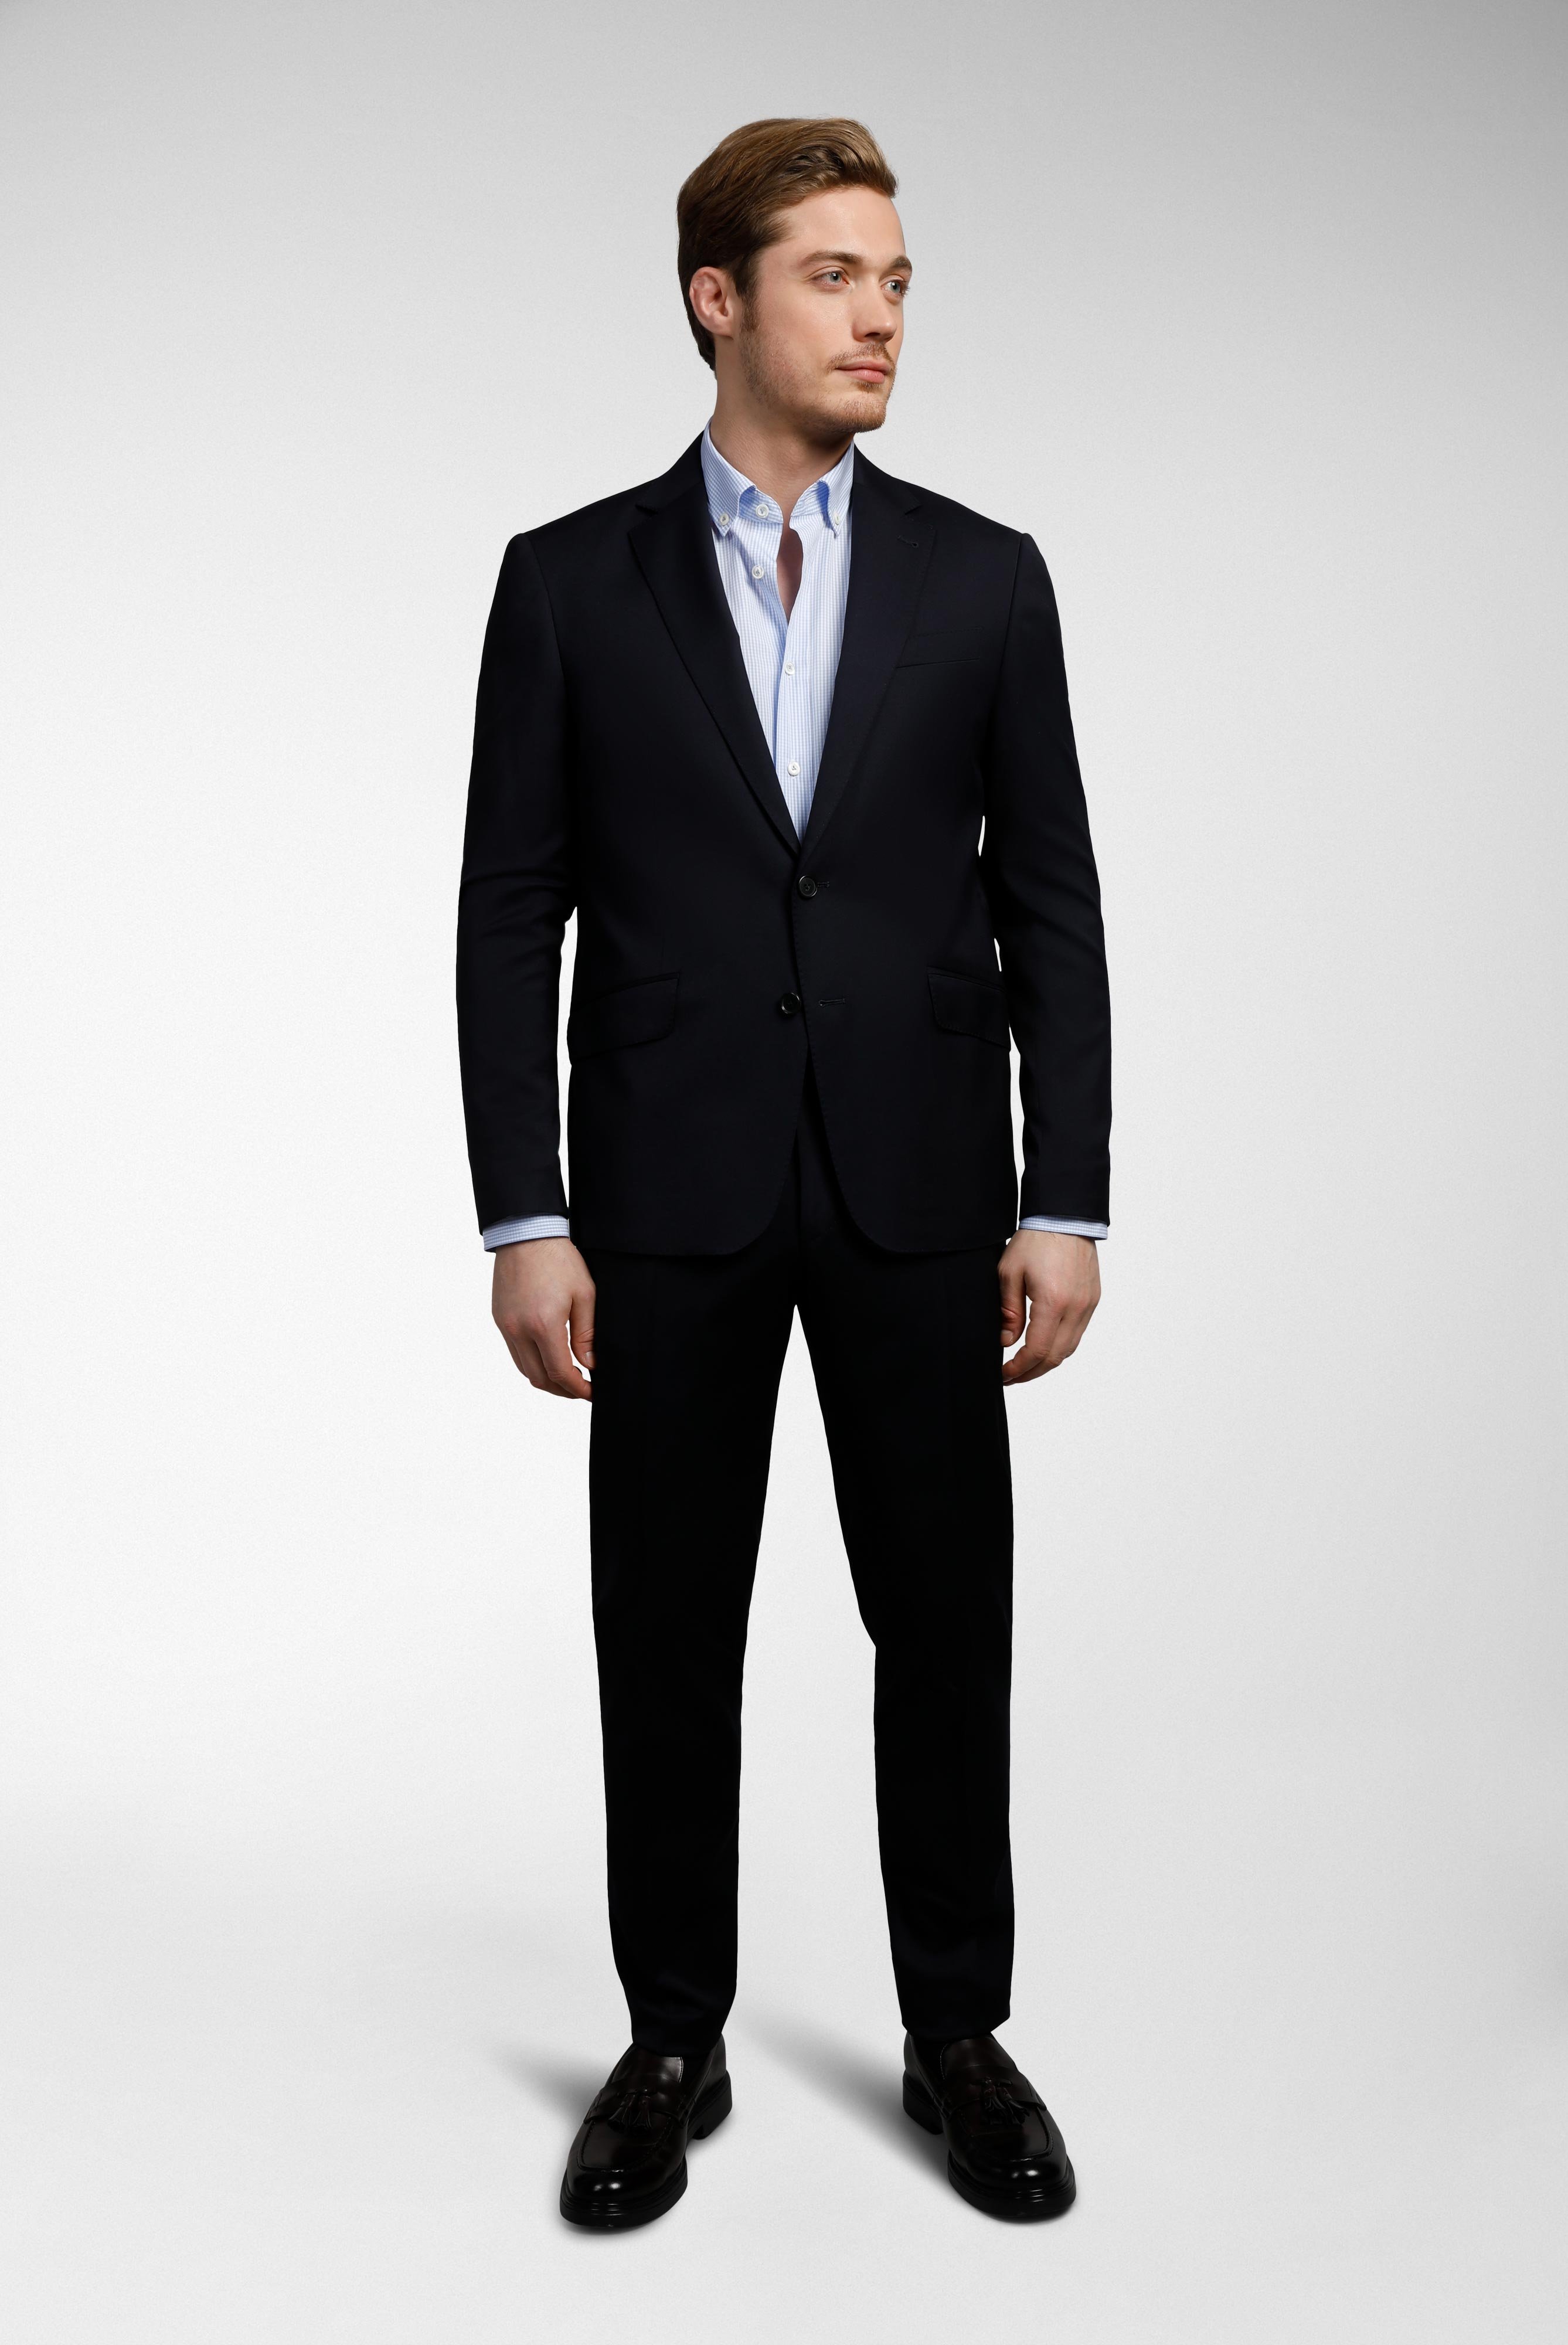 Jeans & Trousers+Wool Trousers Slim Fit+20.7880.16.H01010.780.23